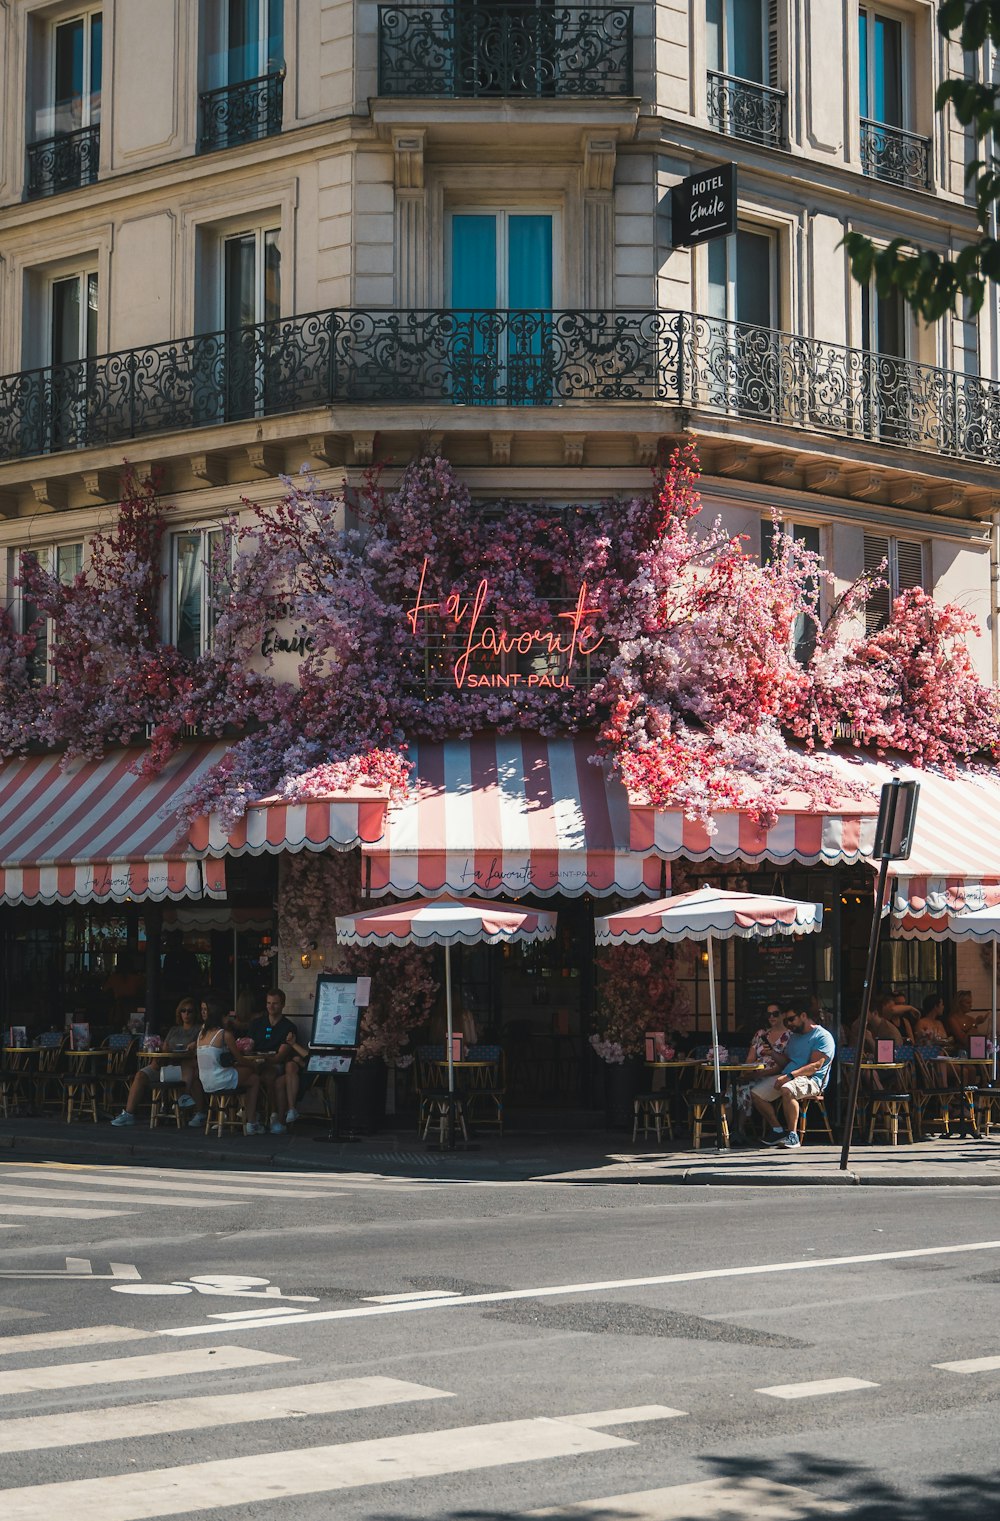 a building with a pink awning and a street with people sitting at tables